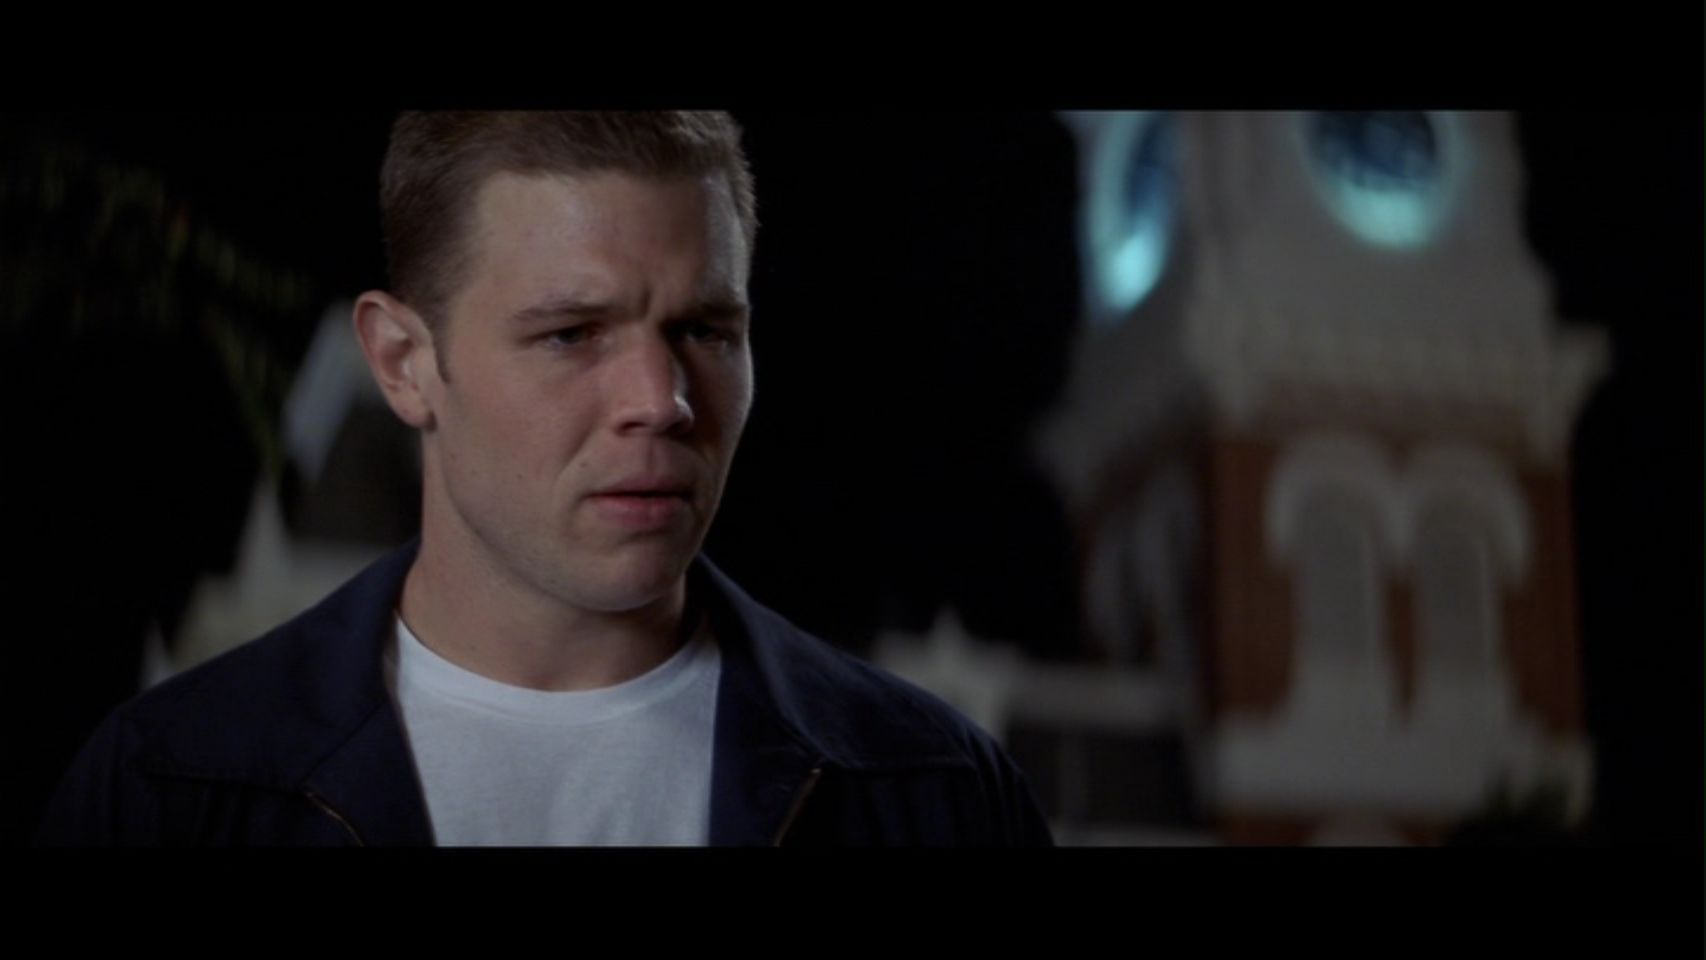 Remember The Titans Images on Fanpop.